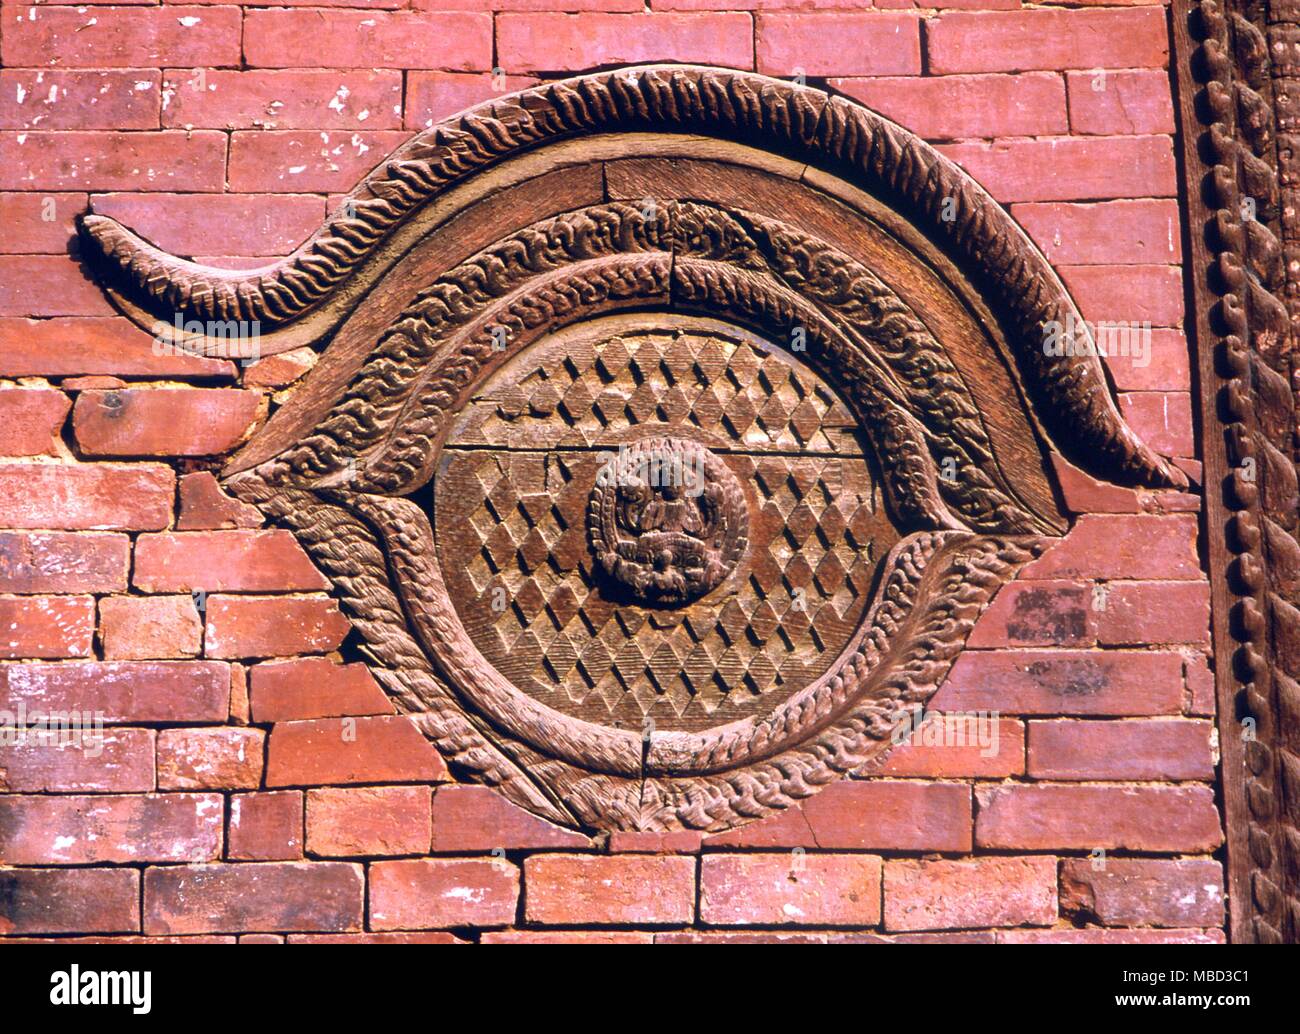 Symbols - Eye. Cosmic eye constructed in brickwork on a temple in Patan, Nepal. Stock Photo